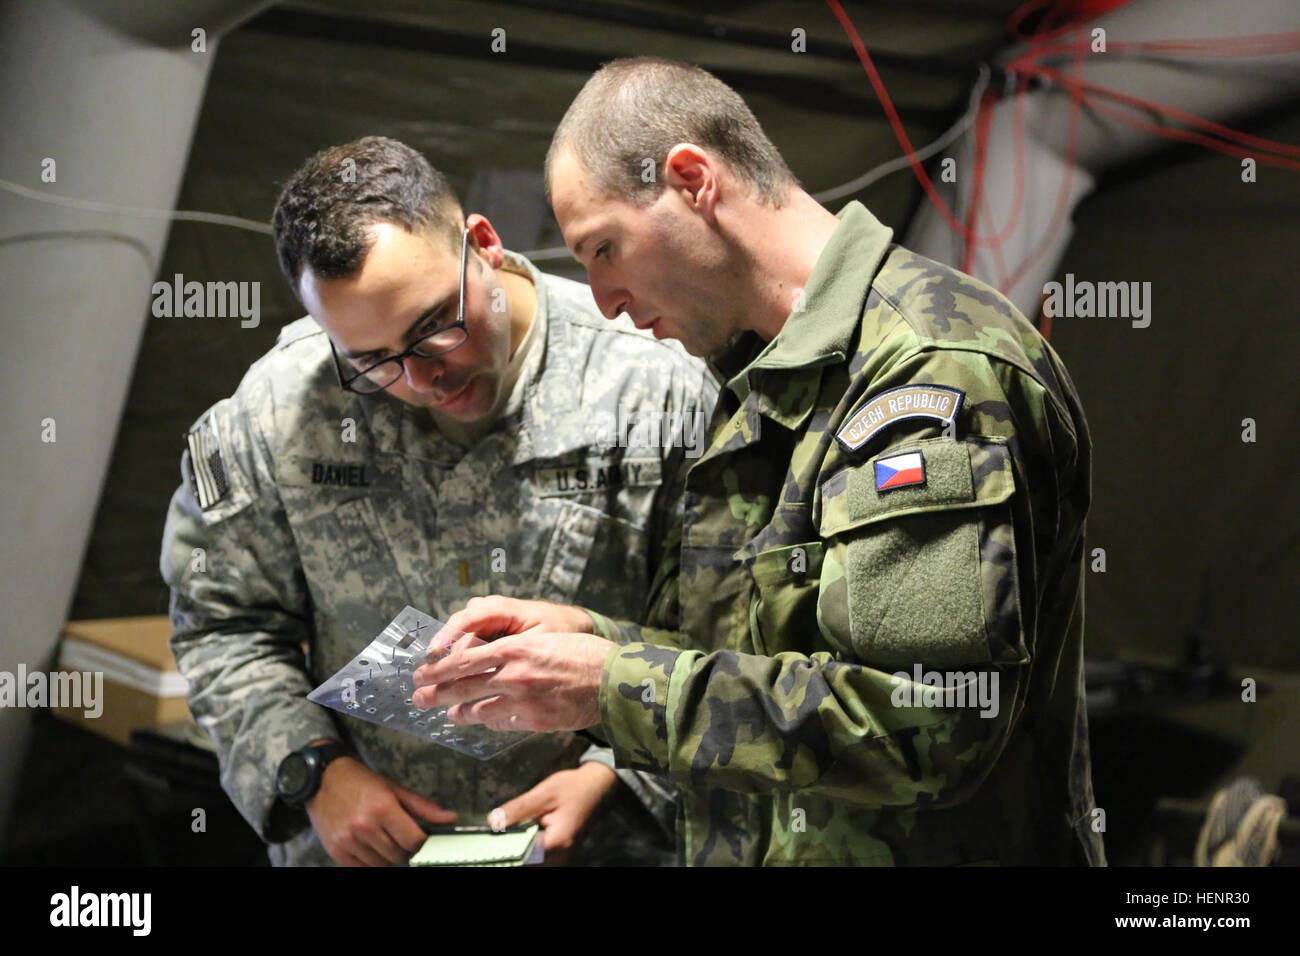 A U.S. Soldier of 1st Squadron (Airborne), 91st Cavalry Regiment, 173rd Airborne Brigade, left, and a Czech soldier of 1st Fire Battery, 131st Artillery Battalion, right, discusses map symbols during training exercise Saber Junction 2014 at the Joint Multinational Readiness Center in Hohenfels, Germany, Aug. 31, 2014. Saber Junction 2014 prepares U.S., NATO allies and European security partners to conduct unified land operations through the simultaneous combination of offensive, defensive and stability operations appropriate to the mission and the environment. More information about Saber Junc Stock Photo